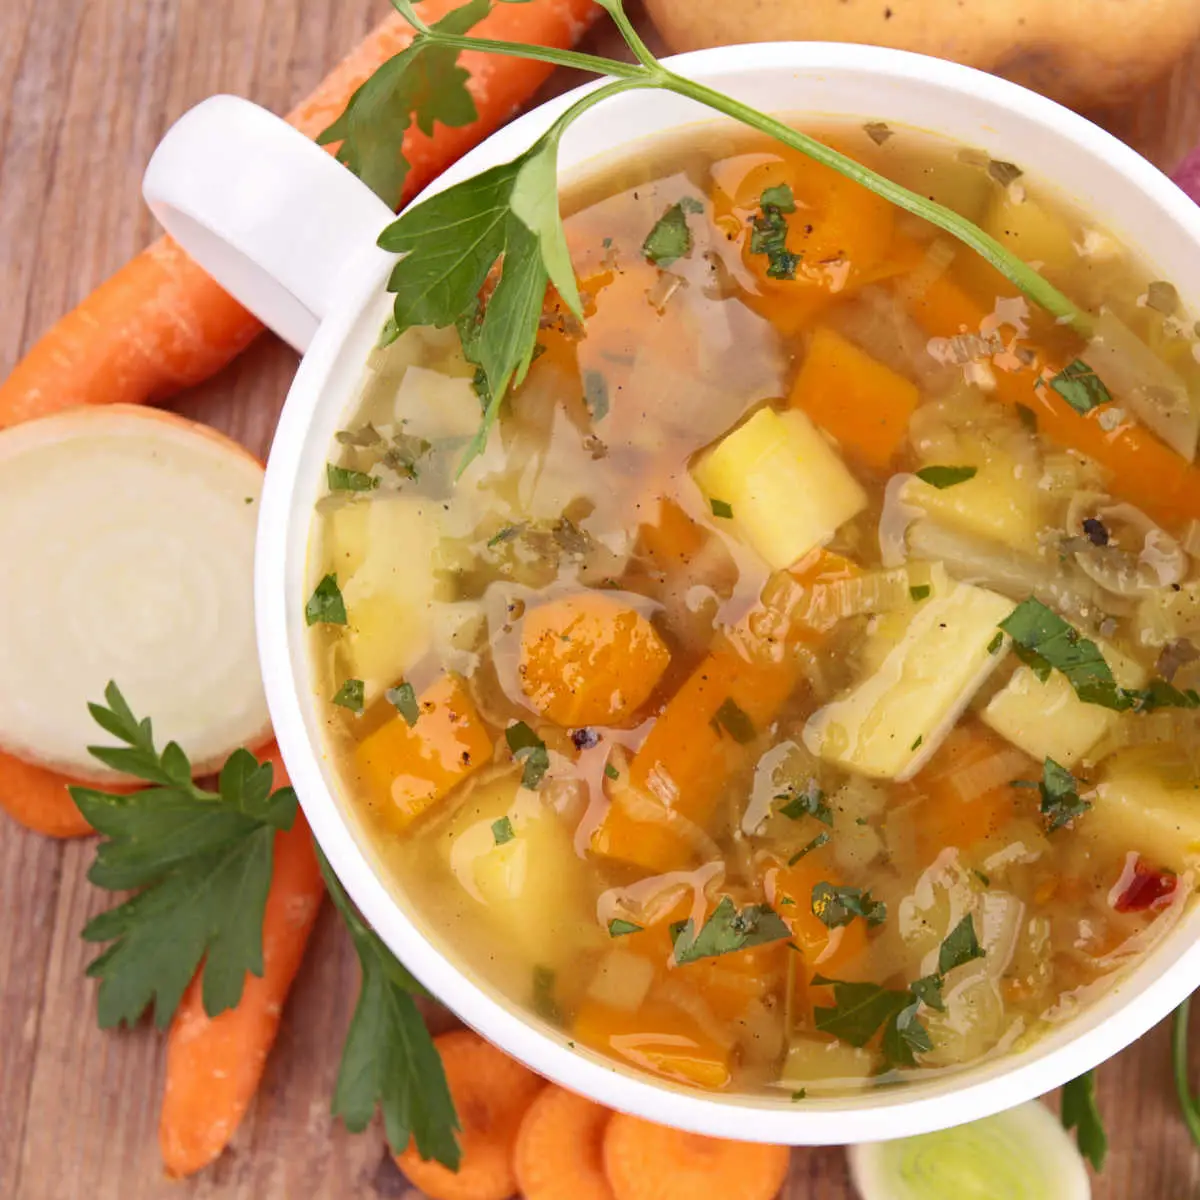 Vegetable Soup Recipe (No stock or broth needed) – Yum Eating